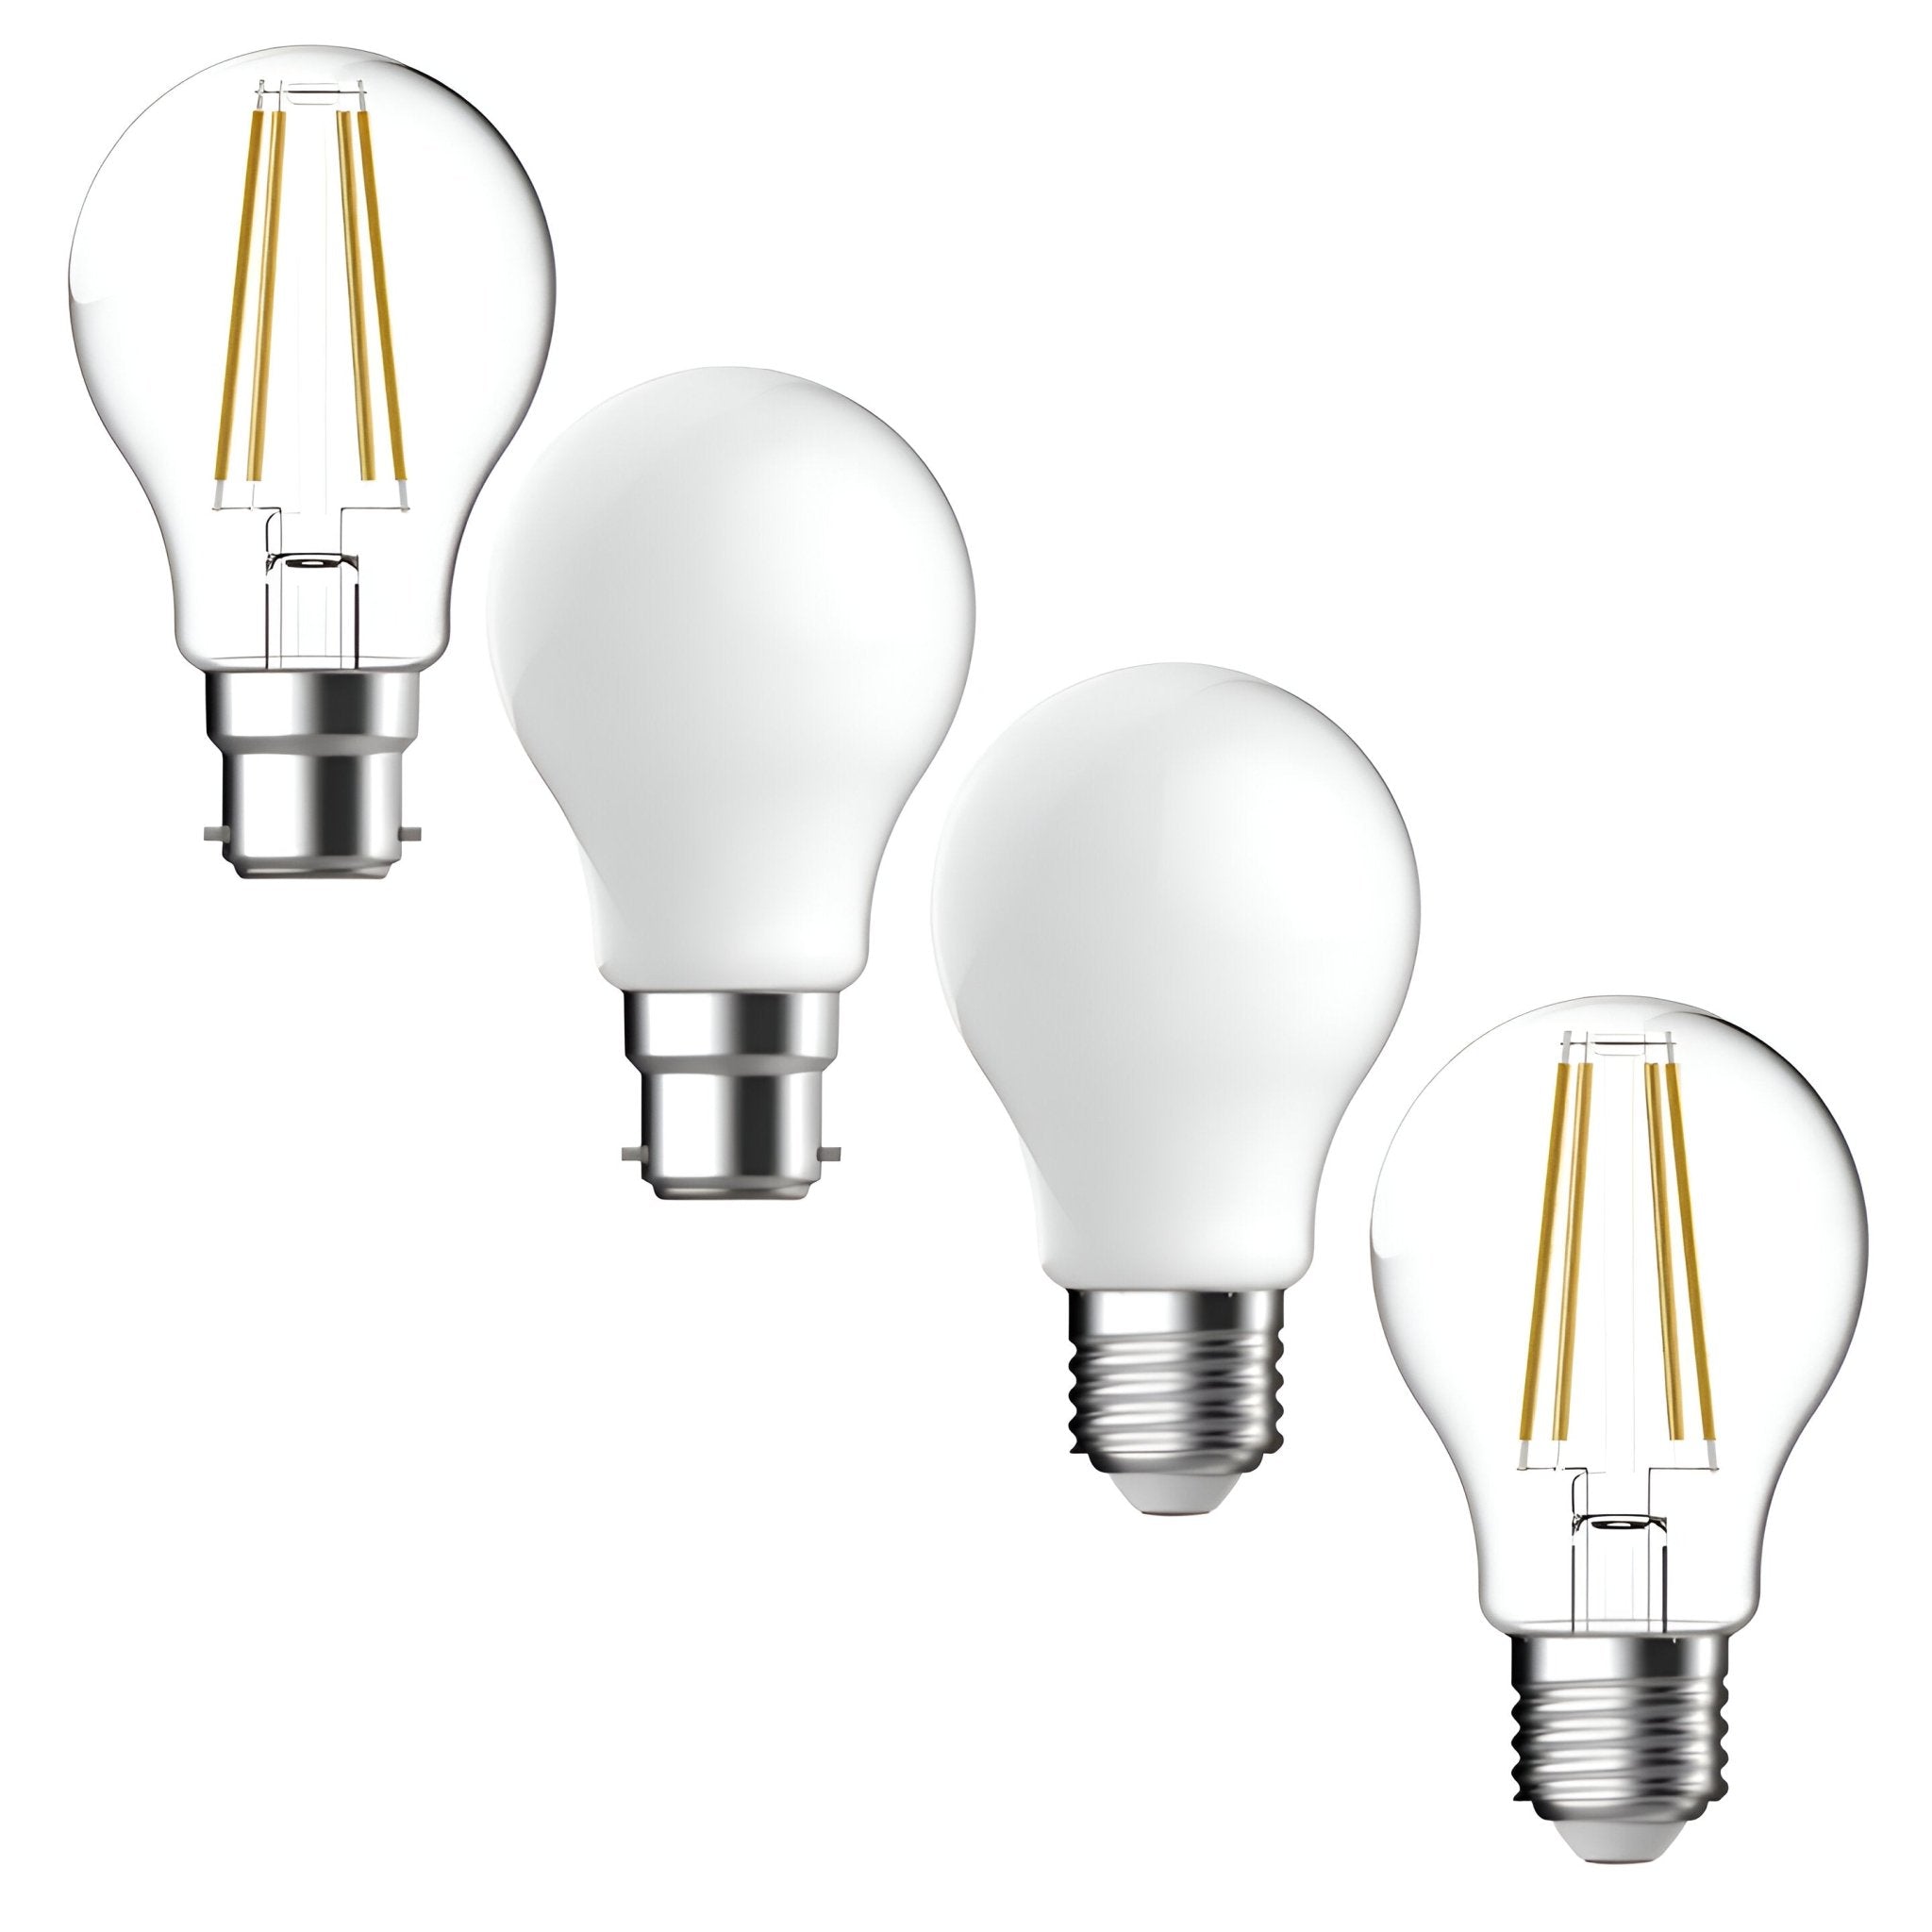 Domus GLS 7.8W Dimmable Led Filament Lamp -Clear, Frost- 240V - E27/ B22 - Mases LightingDomus